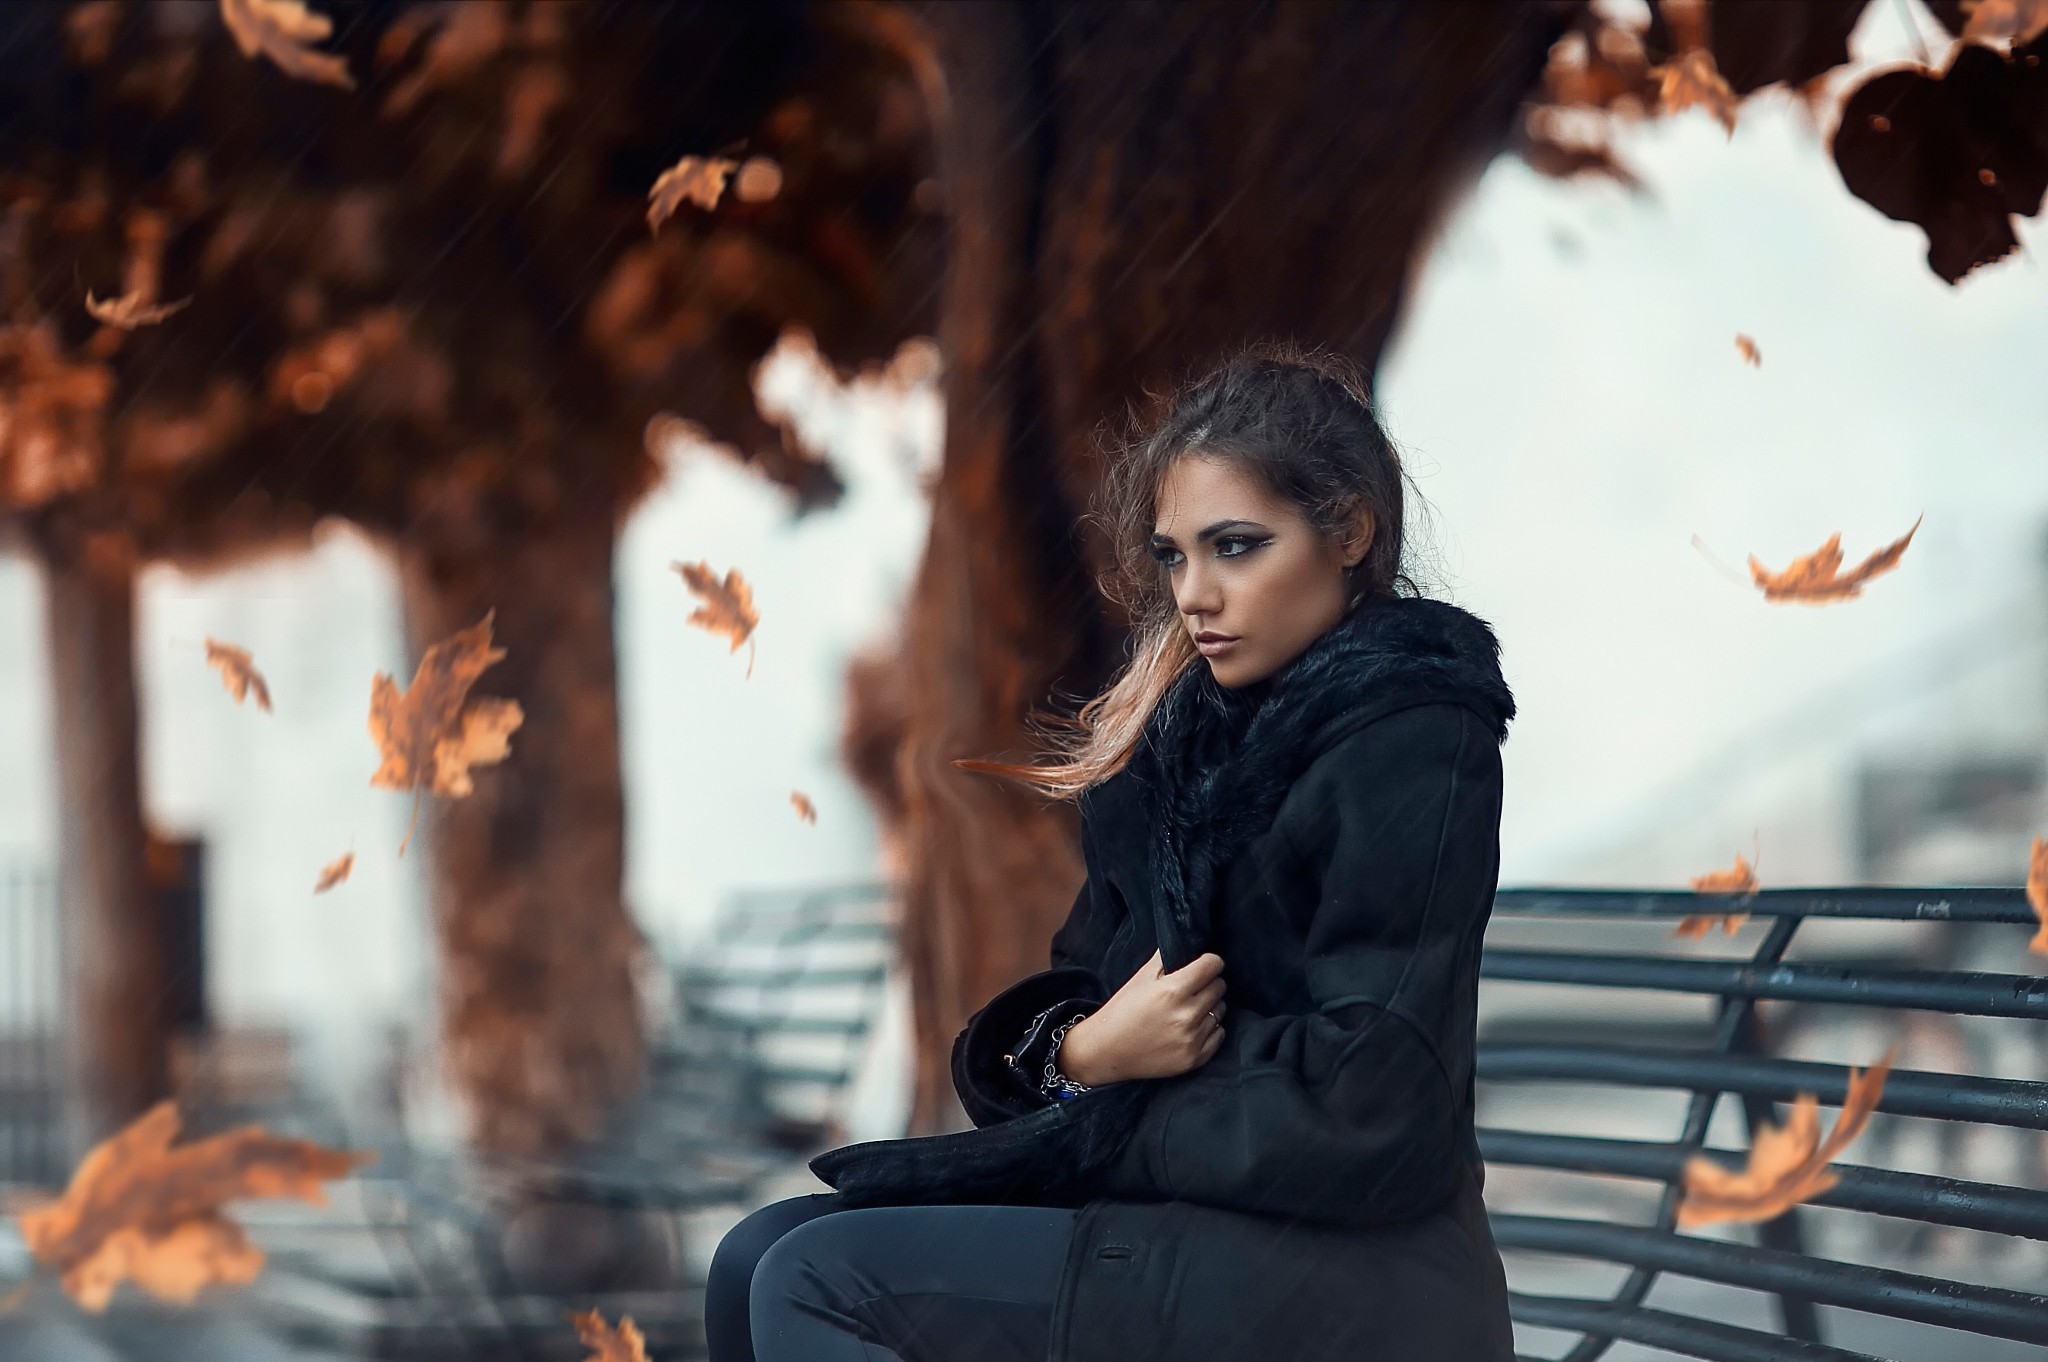 women, Leaves, Bench, Women Outdoors, Fall, Alessandro Di Cicco Wallpaper